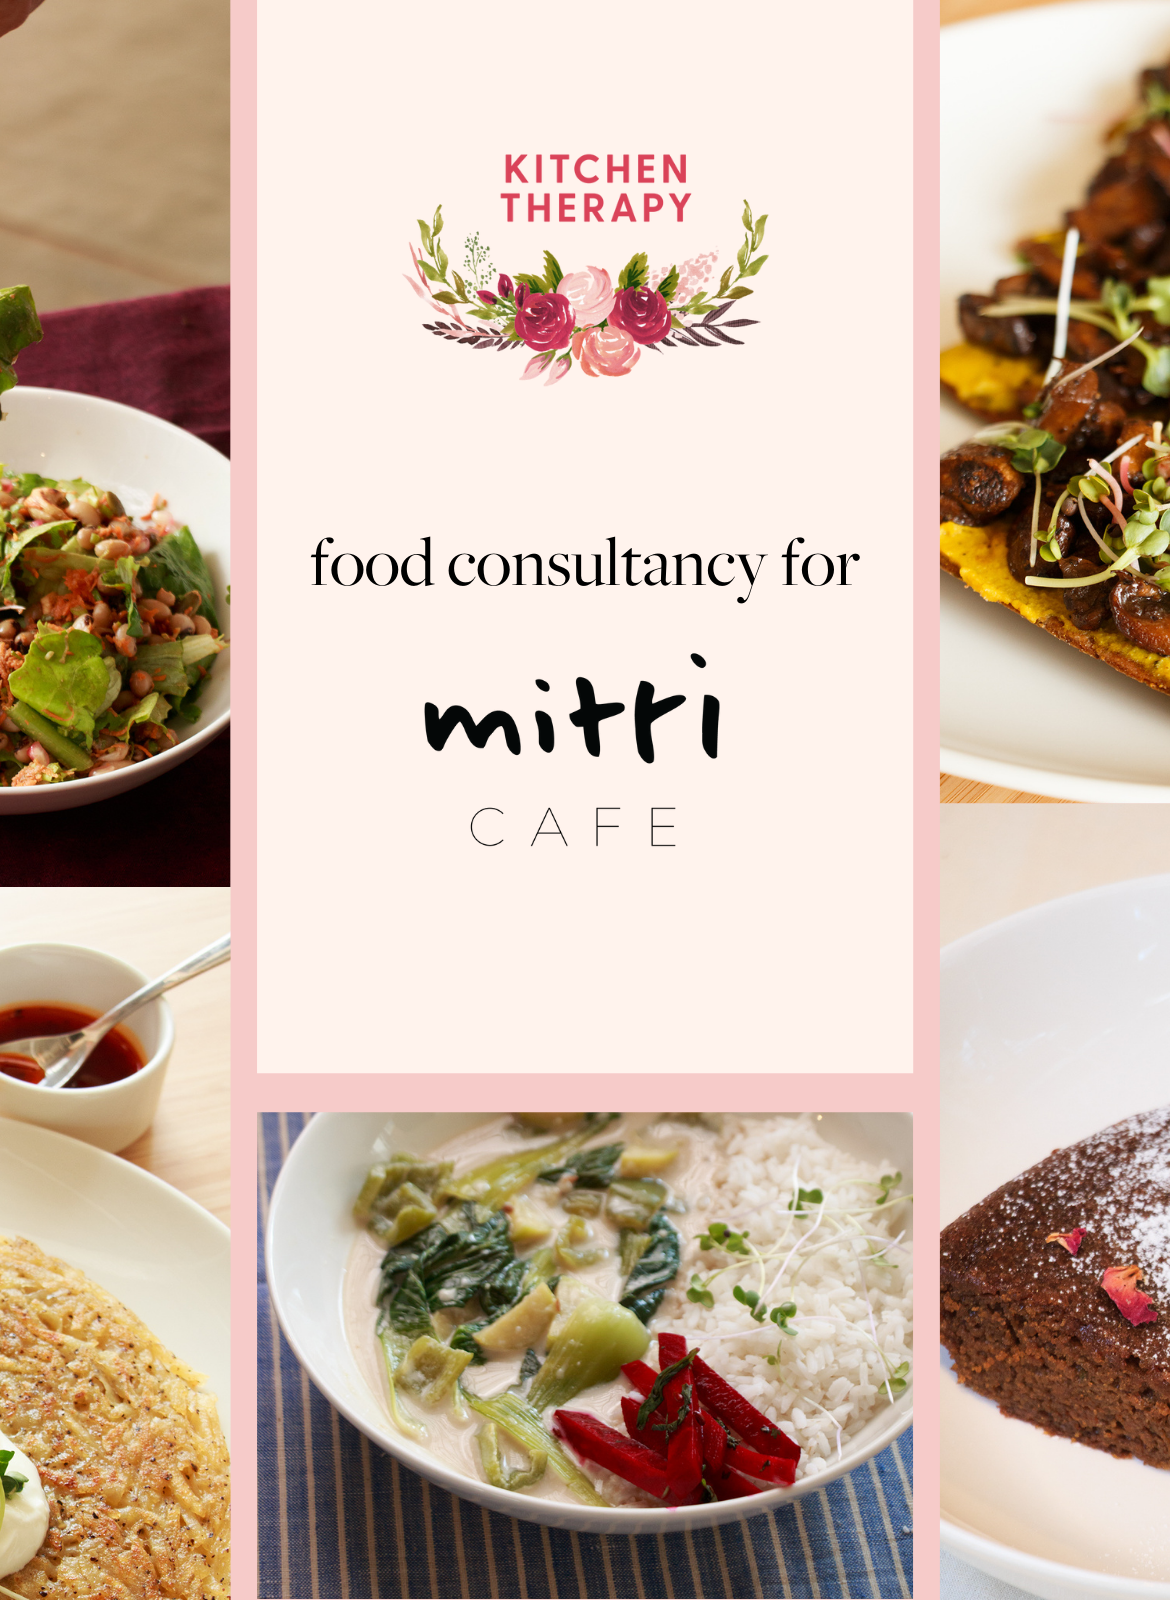 Food consultancy for mitti cafe